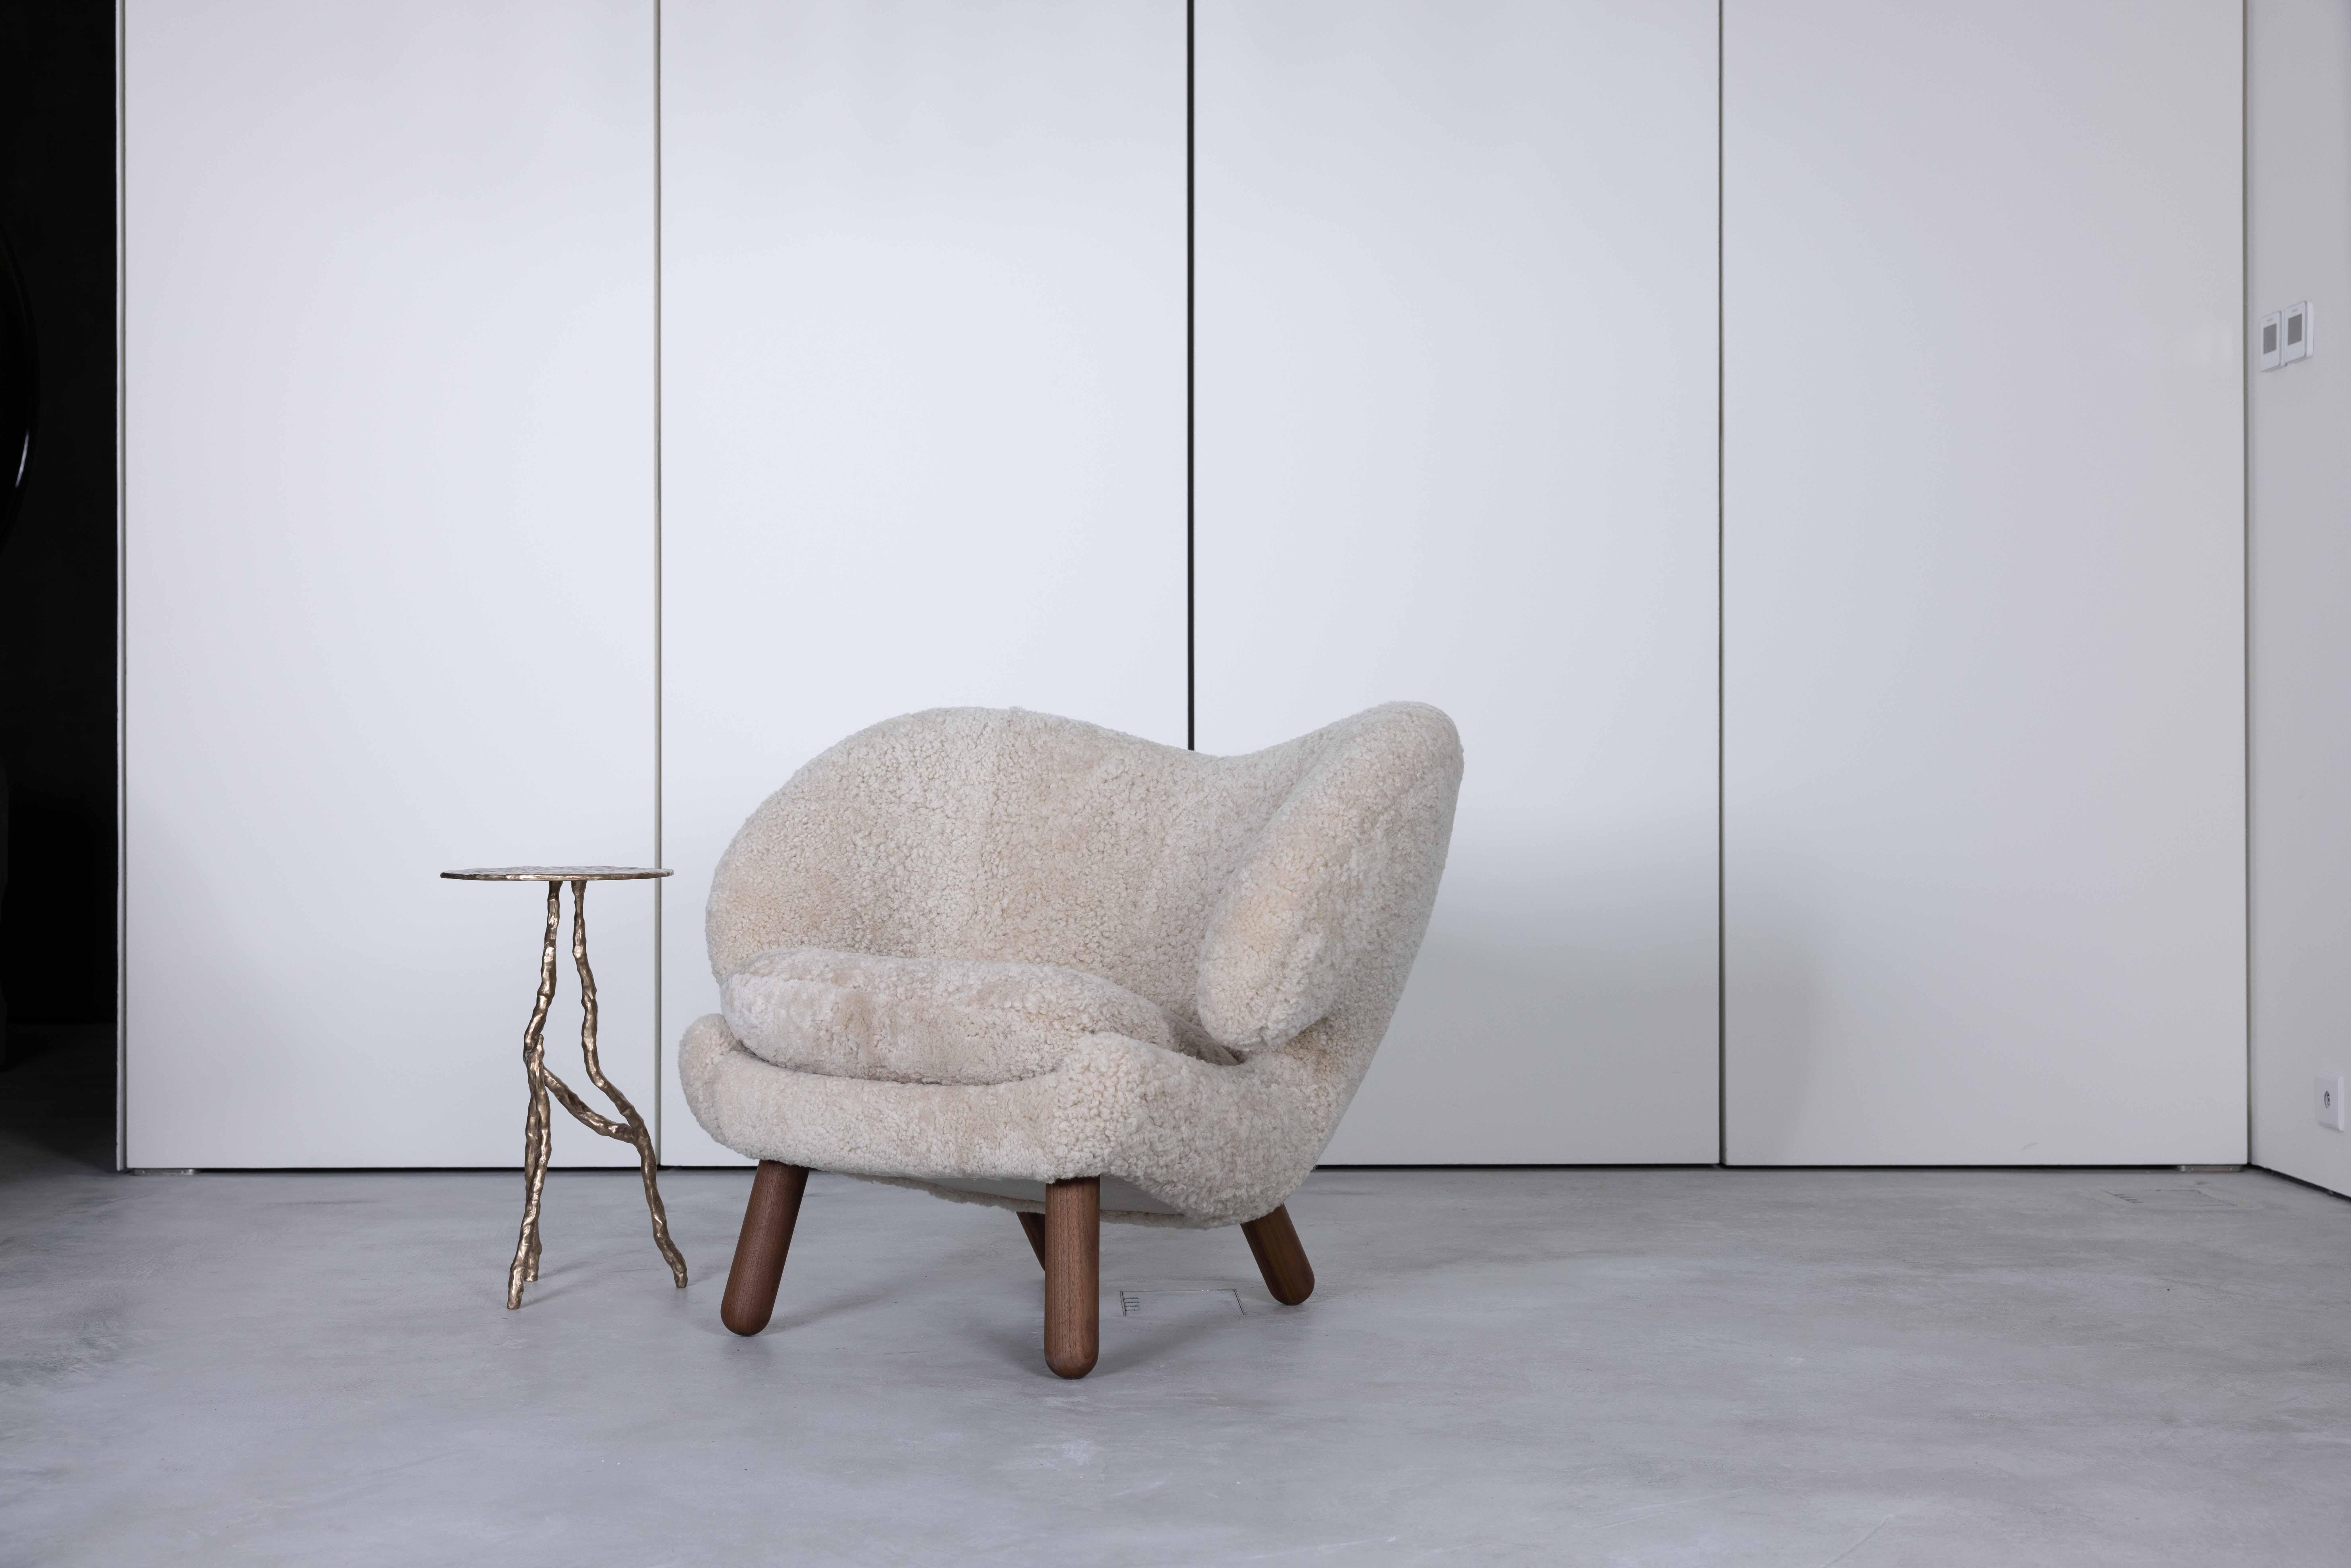 Finn Juhl’s fascination for surrealism is clearly visible in the Pelican Chair. Out of all his many designs, the Pelican Chair was probably the one furthest ahead of its time. The Pelican Chair is produced with buttons. It is manufactured with a